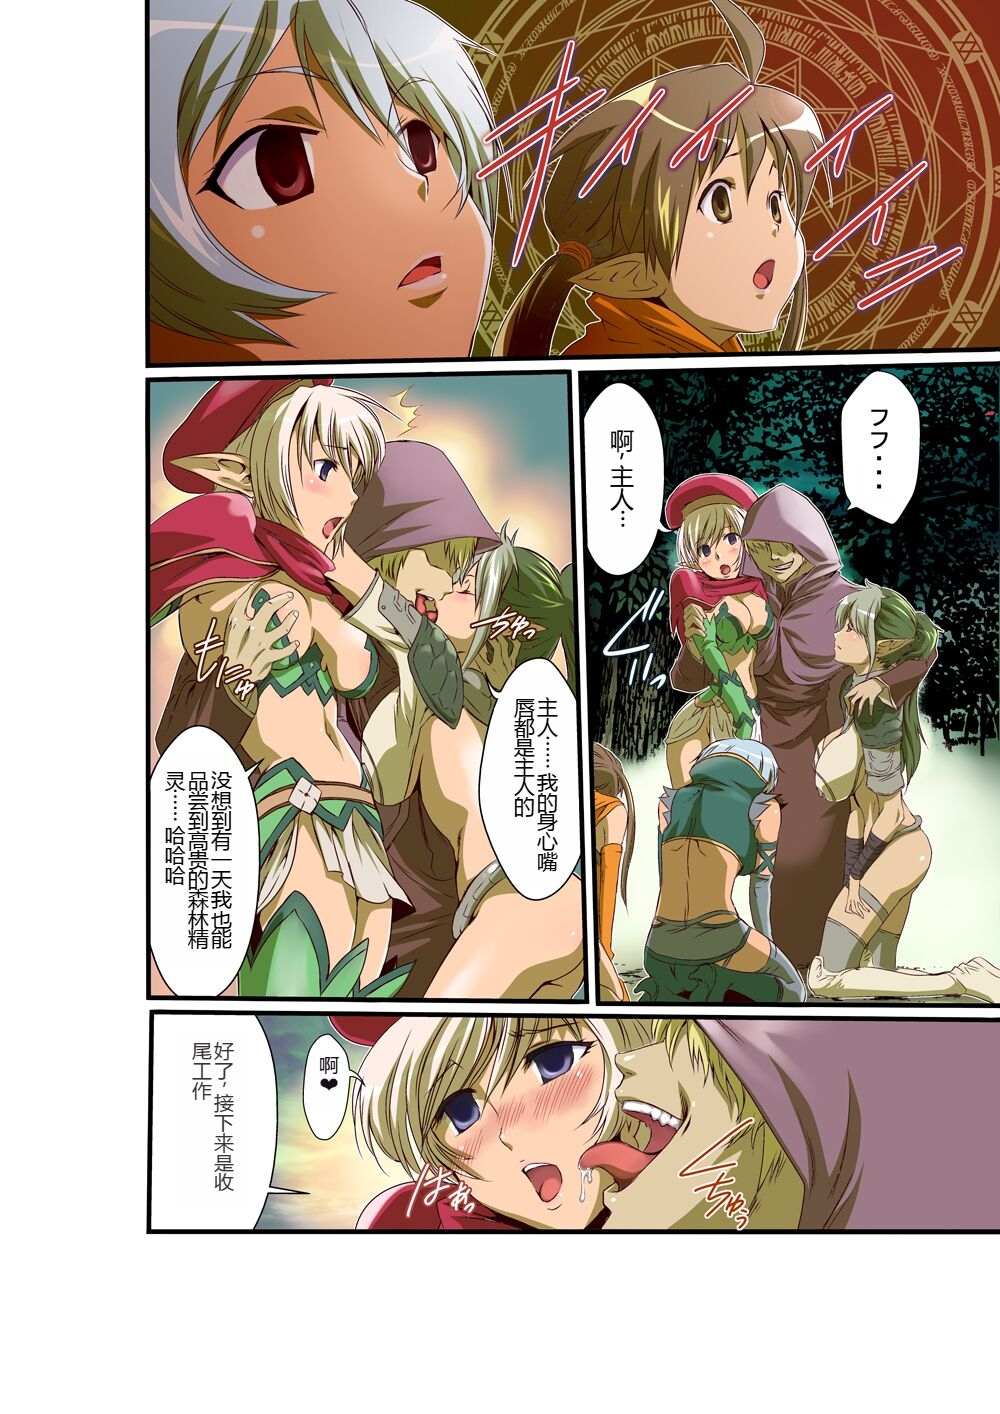 [Utsuro na Hitomi] Queen's *lade Mind-control Manga (Queen's Blade) [chinese] [lalala1234个人机翻汉化] 13